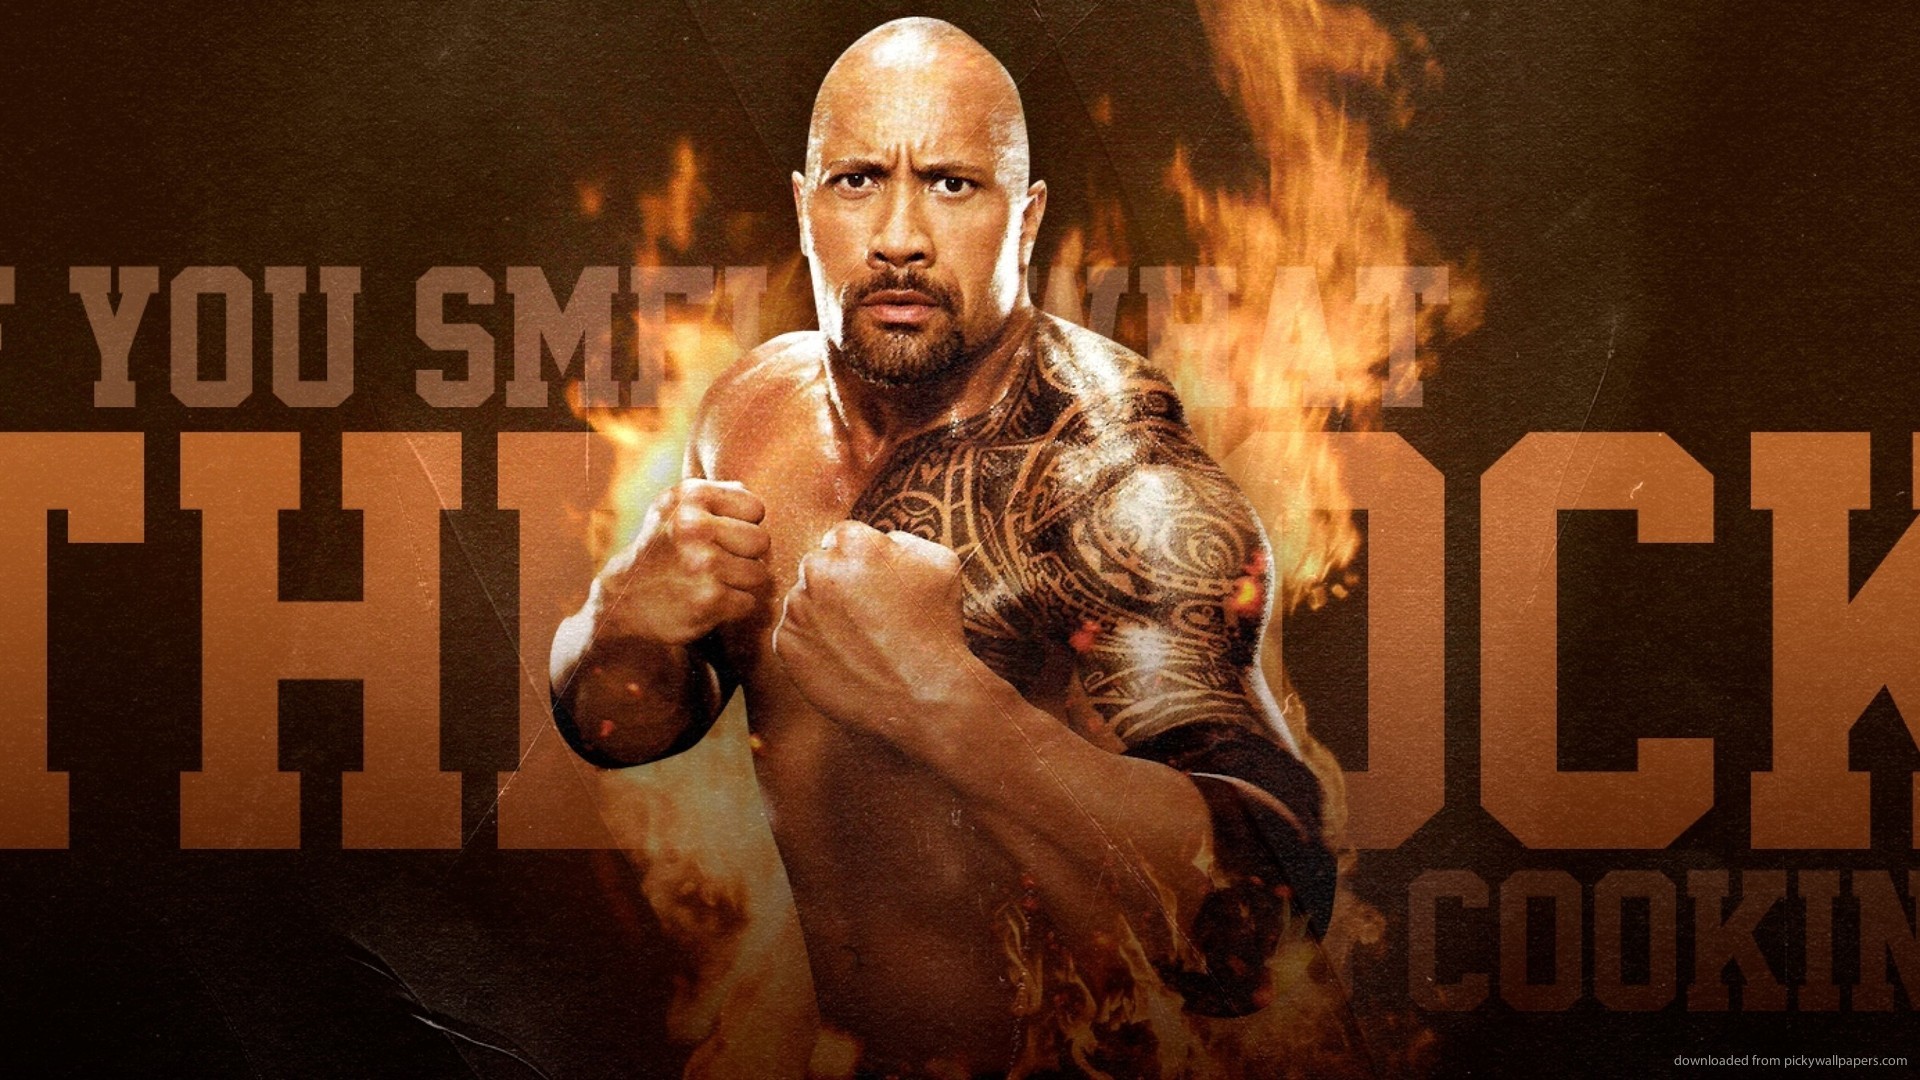 1920x1080 The Rock HD Pictures 1 whb #TheRockHDPictures #TheRock #WWETheRock #wwe # wrestling